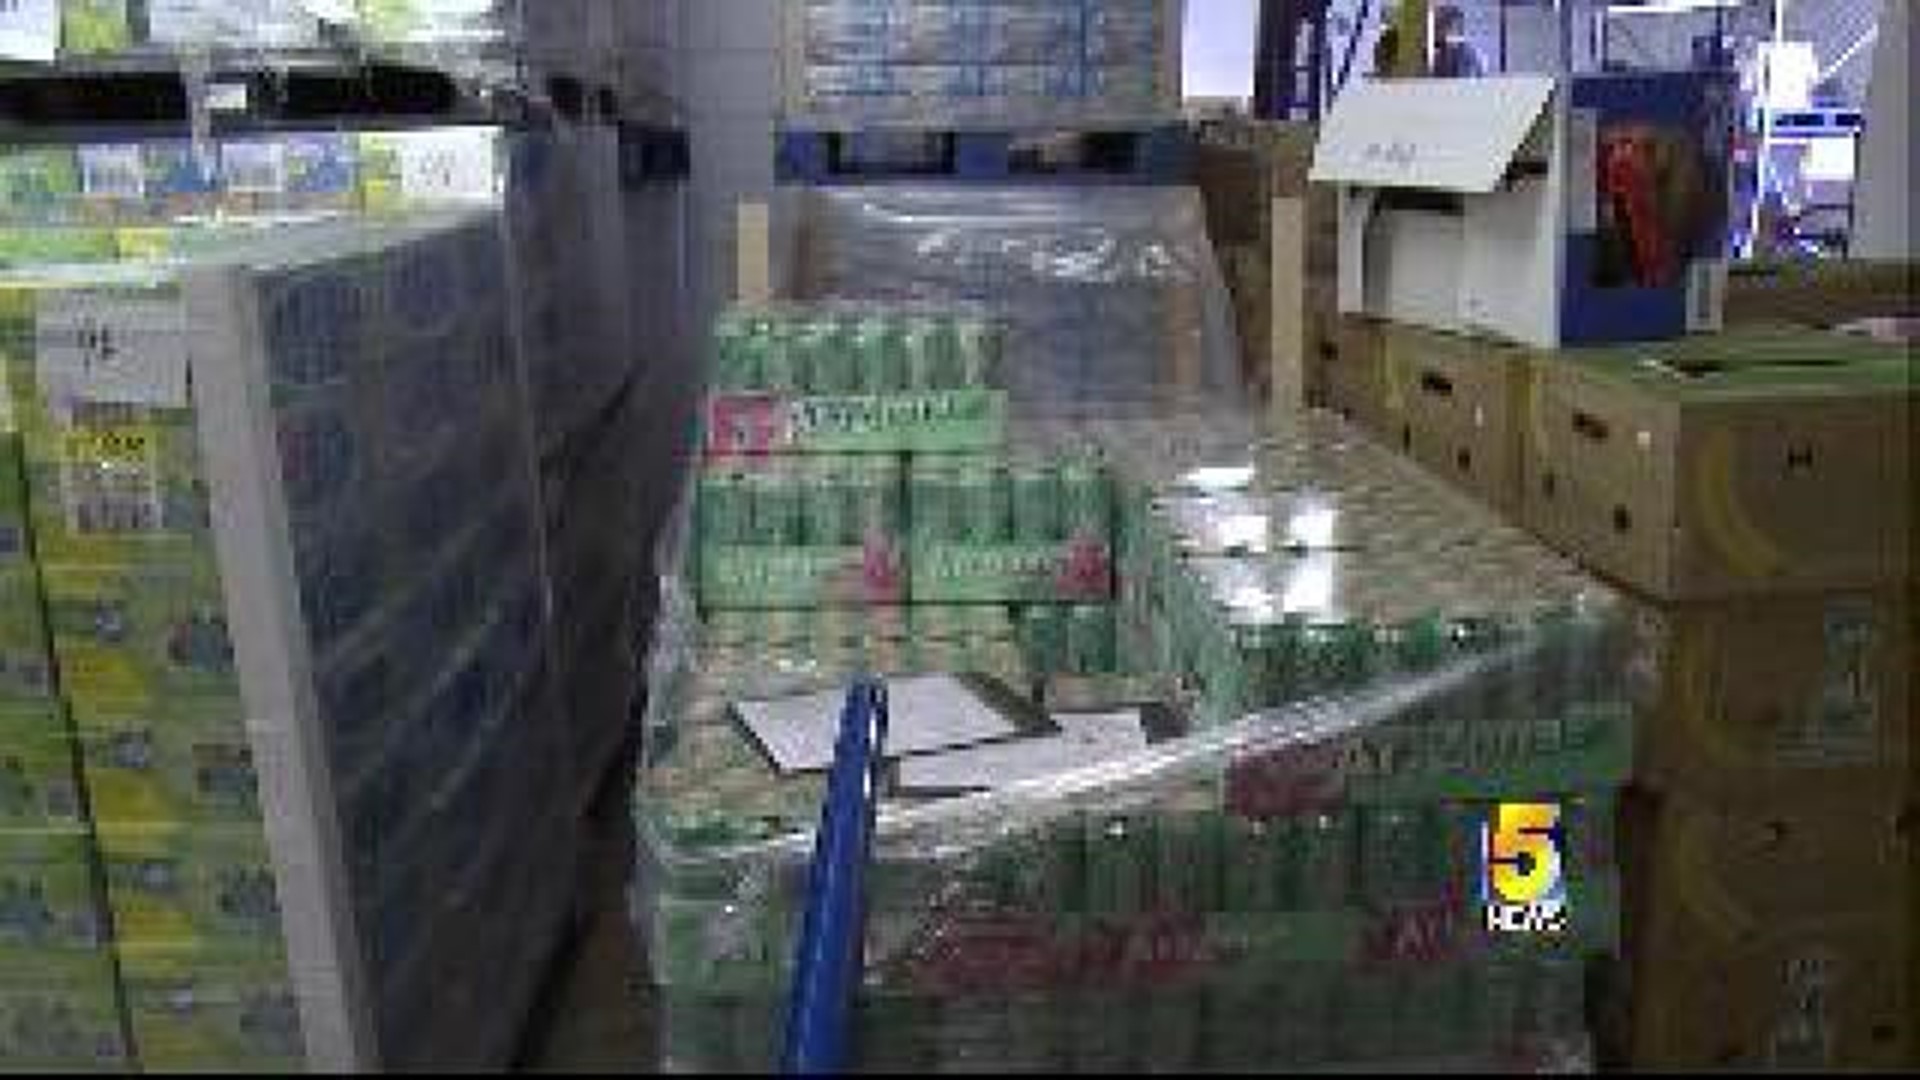 Food Donation Headed for Scott County